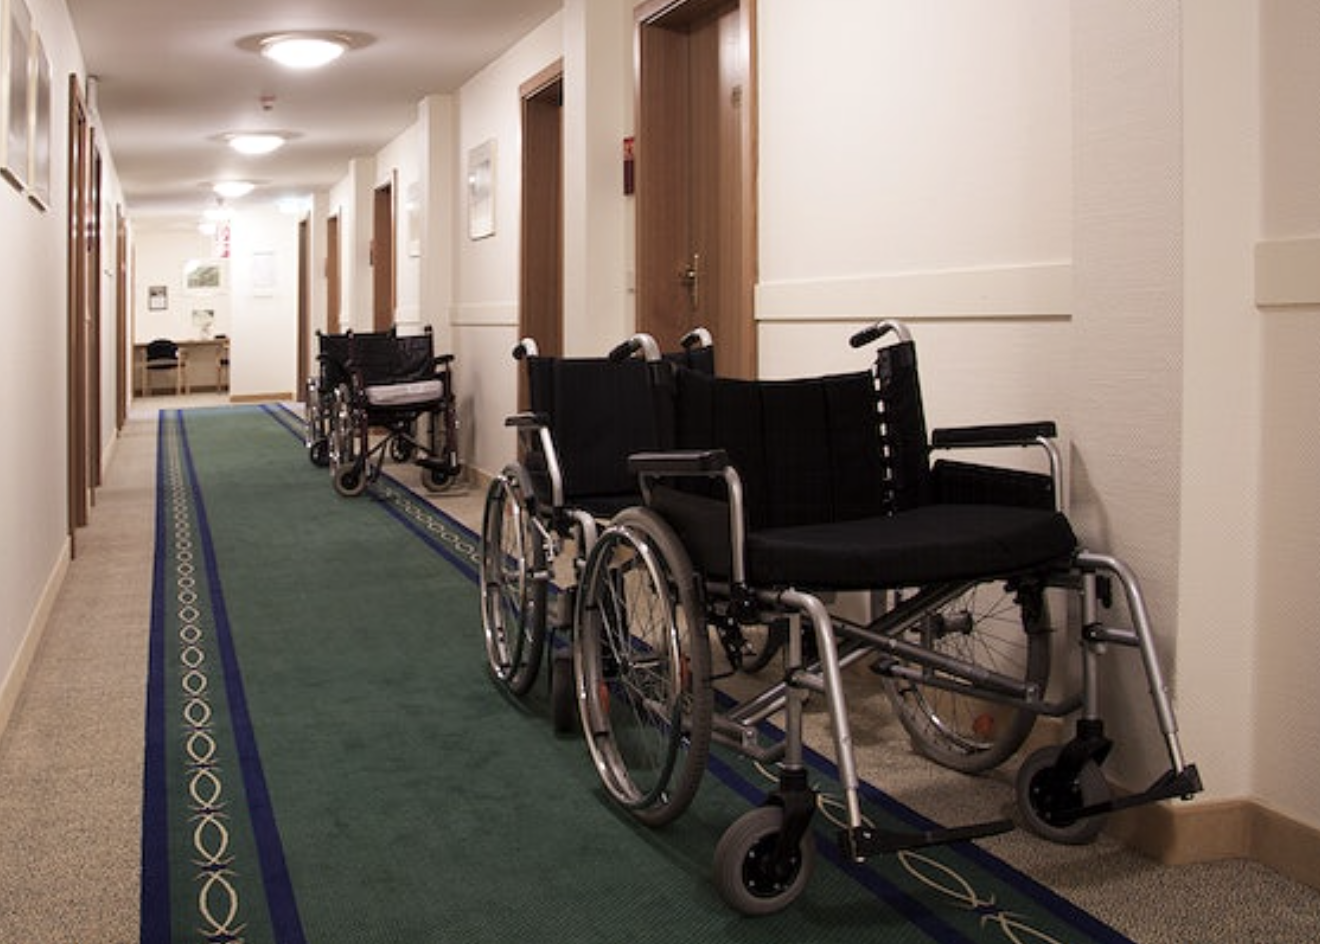 Wheel chairs in the hall of a healthcare facility